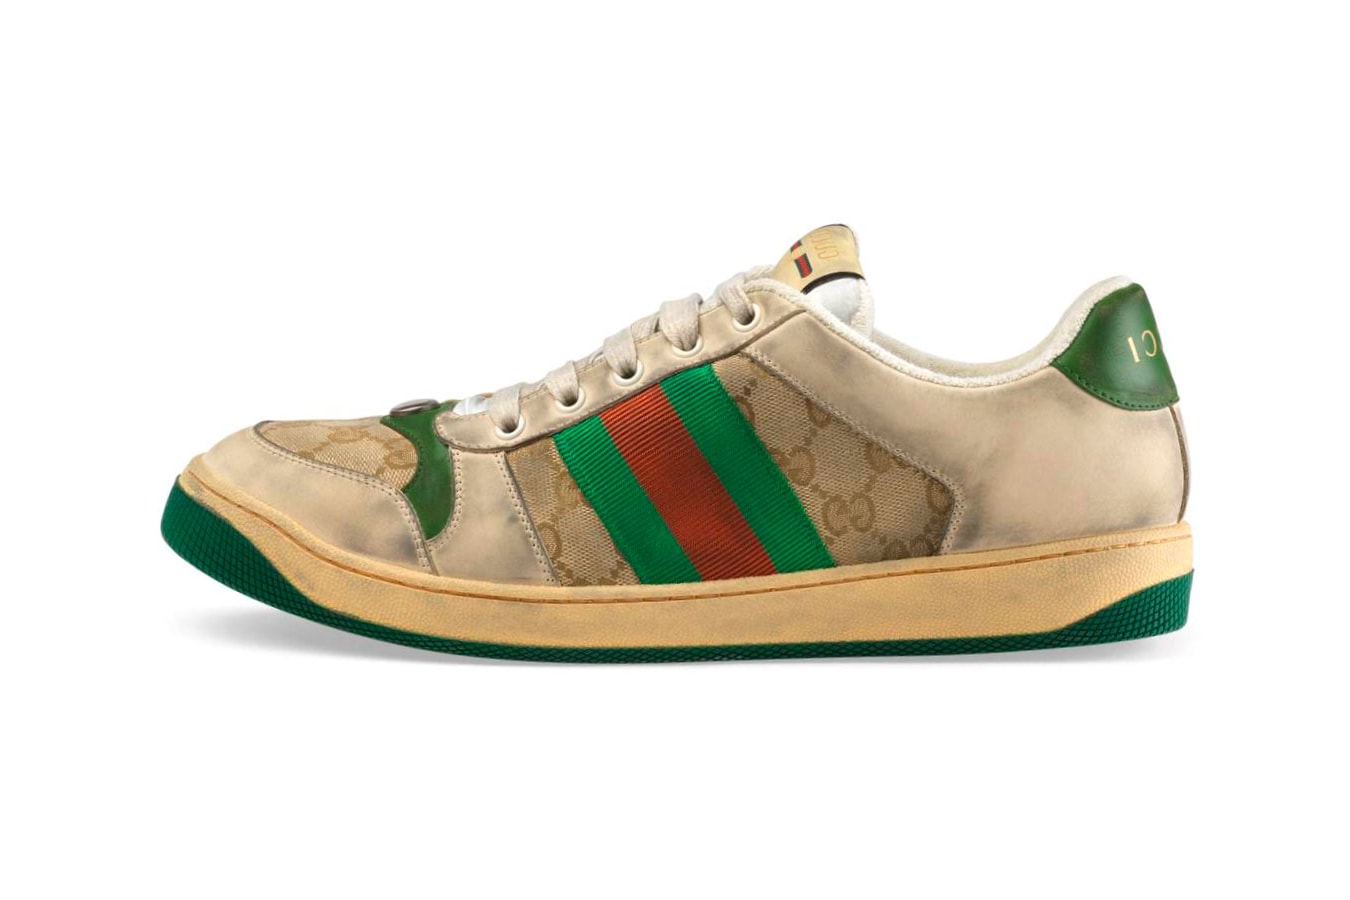 Buy Gucci Slip On Shoes: New Releases & Iconic Styles